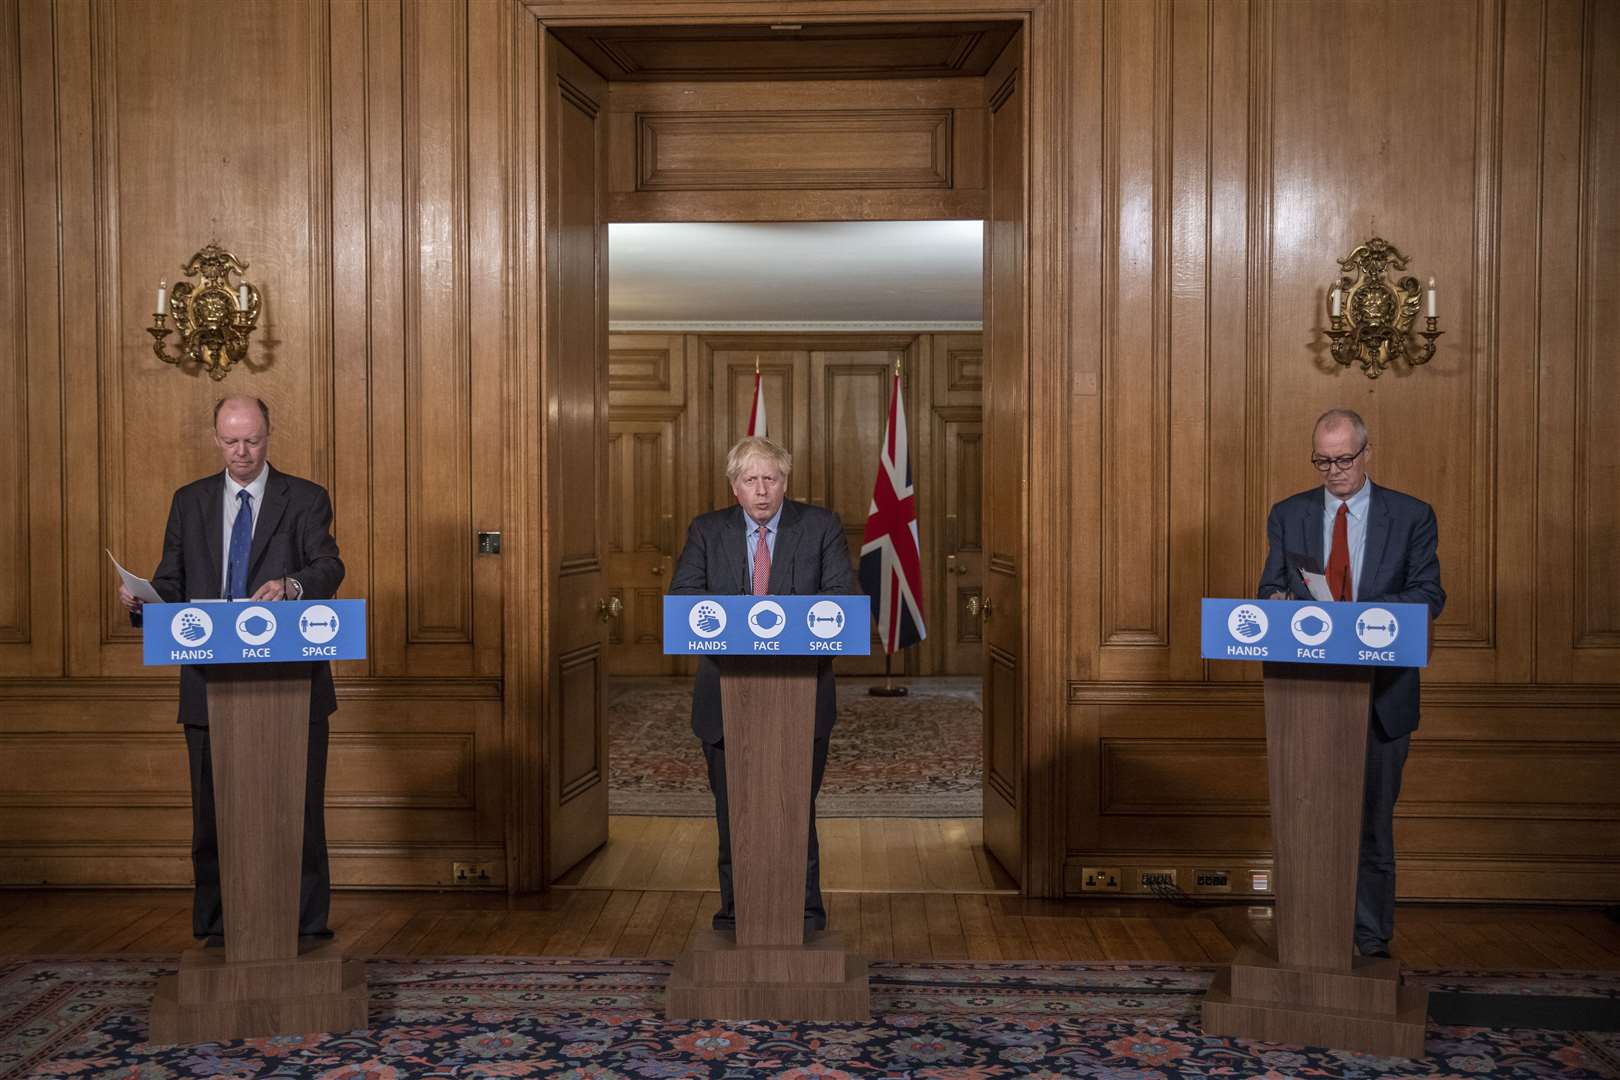 Chief medical officer Professor Chris Whitty, left to right, Prime Minister Boris Johnson and chief scientific adviser Sir Patrick Vallance at the press conference (Jack Hill/The Times/PA)